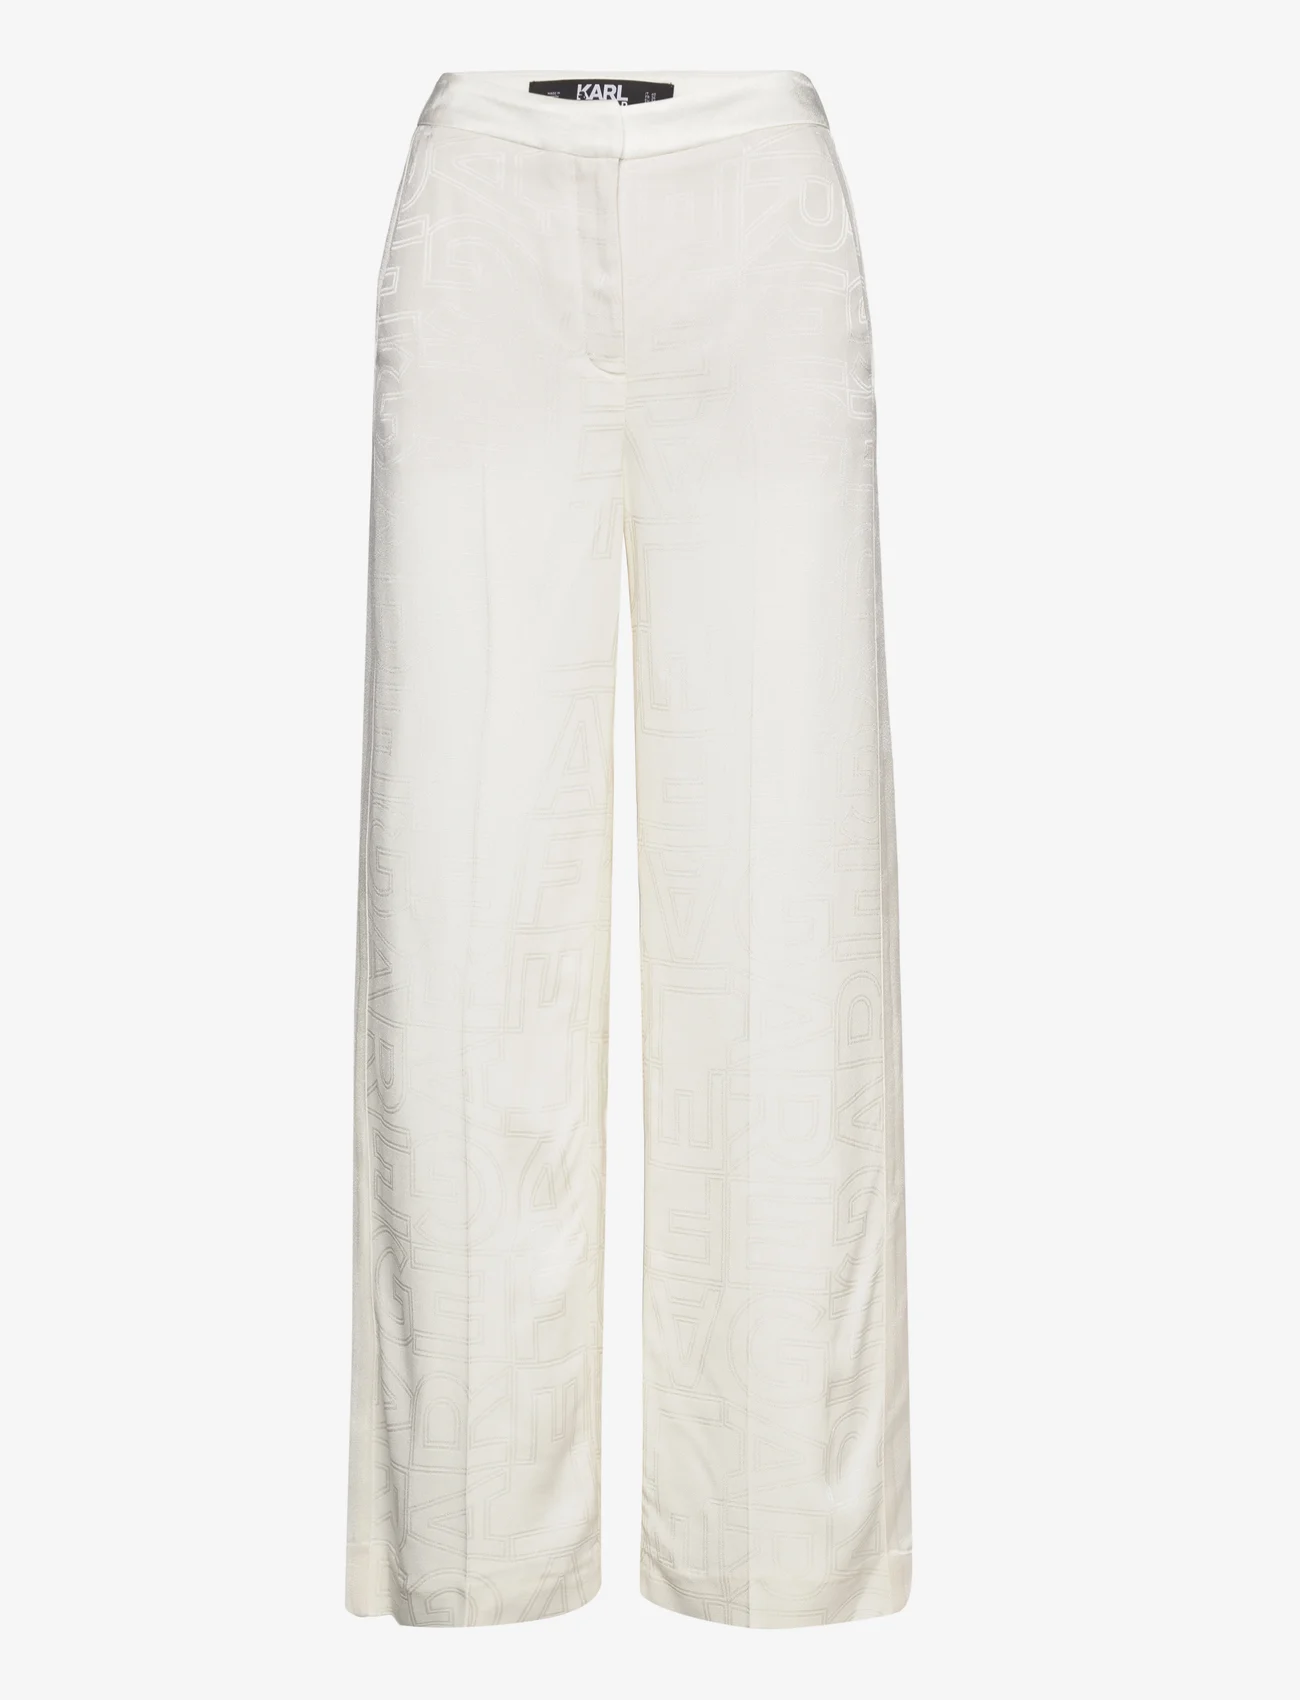 Karl Lagerfeld - logo tailored pants - party wear at outlet prices - off white - 0